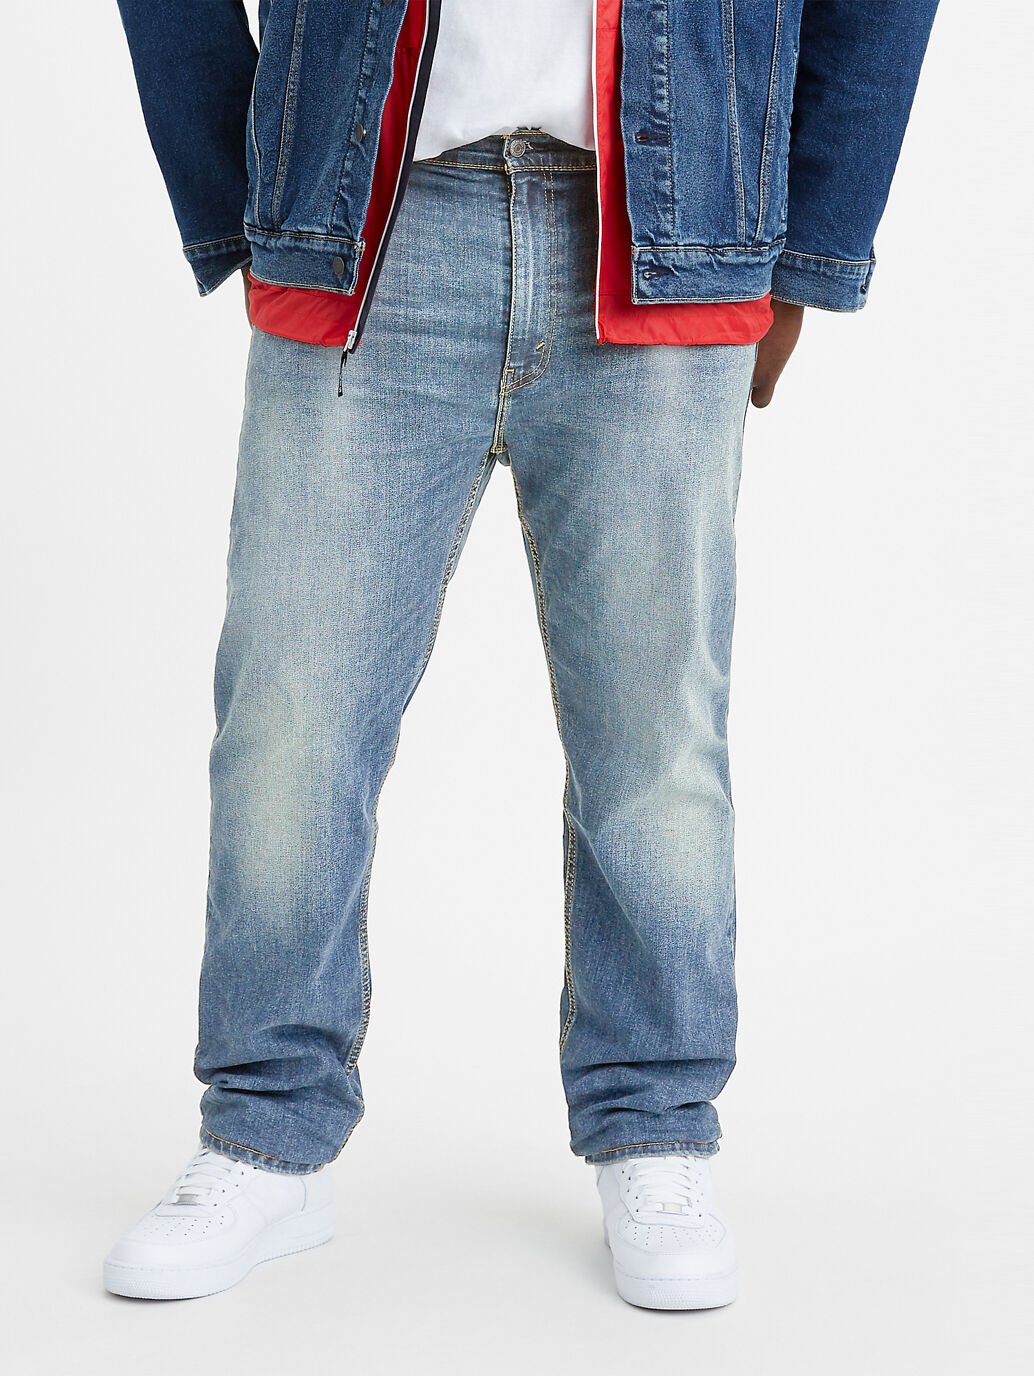 mens levi jeans clearance